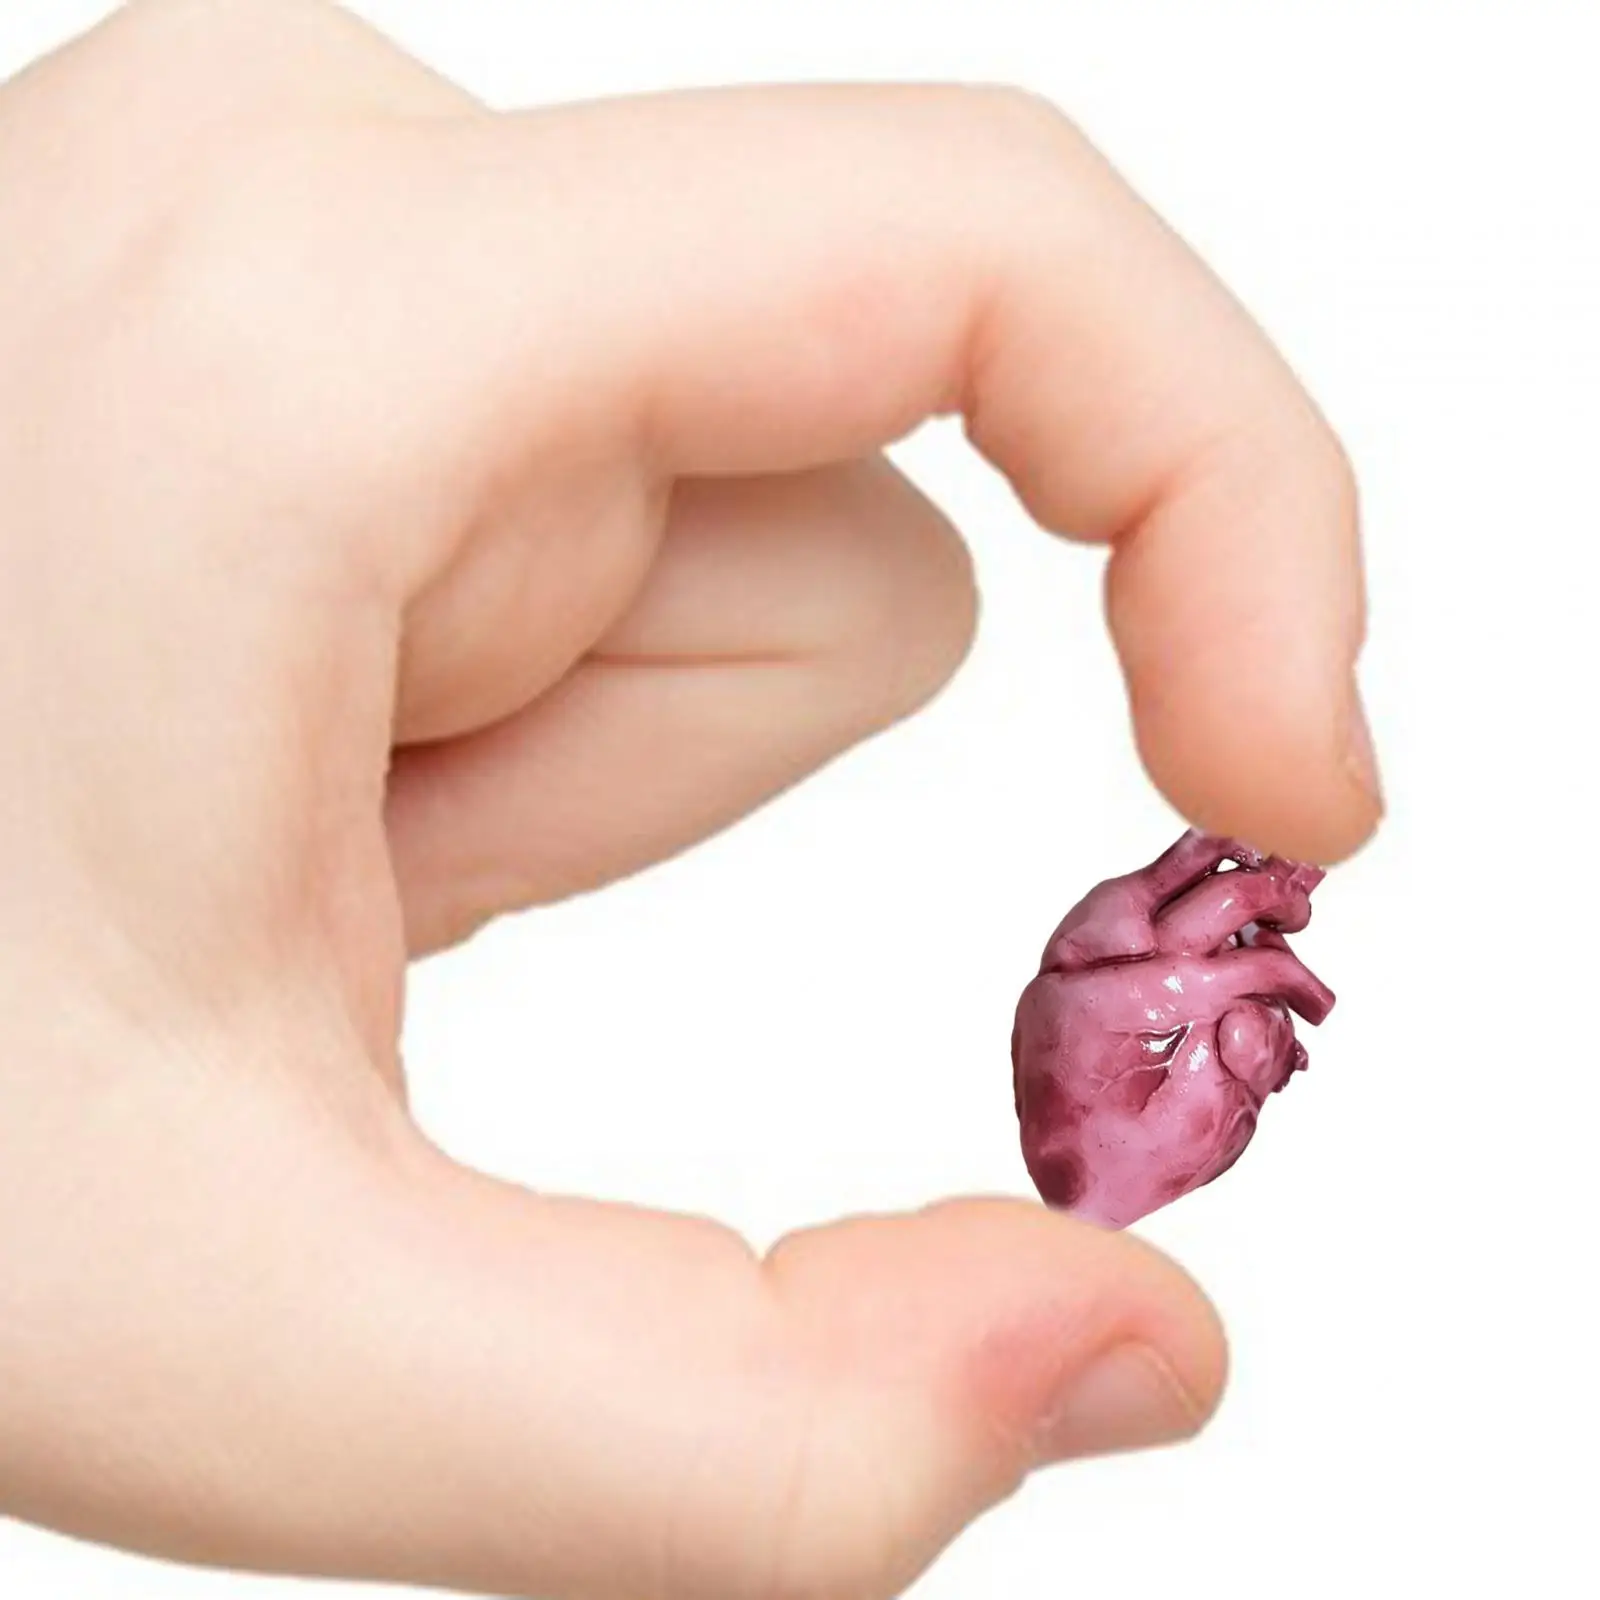 1/18 Scale Resin Heart Model Hobby Lovers Gift Scene Decoration Photo Prop Pretend Play Miniature for 3.75in Action Figures